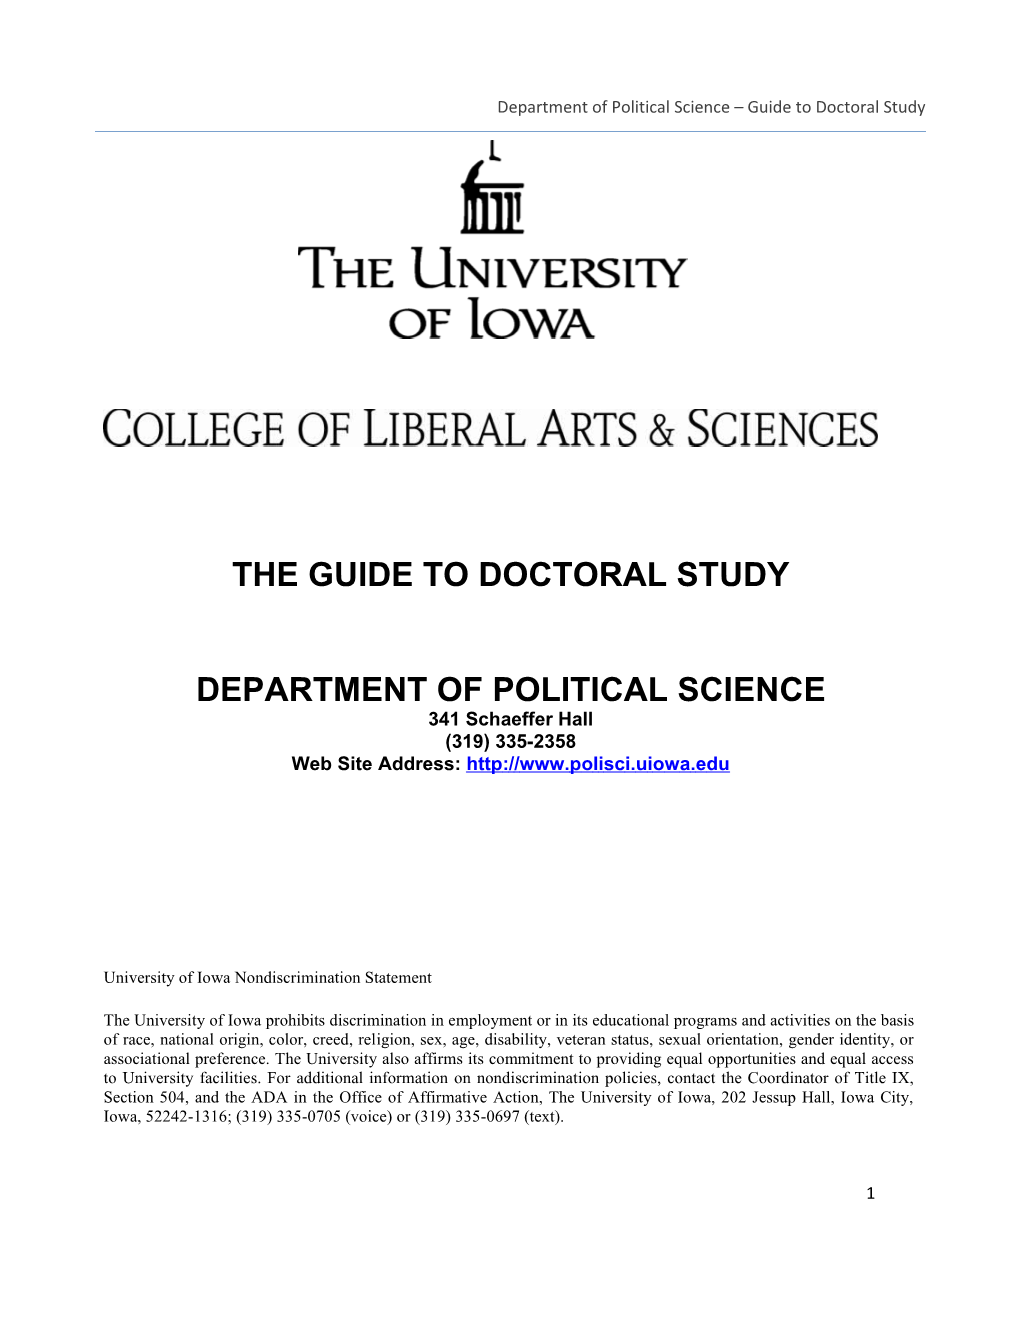 Department of Political Science Guide to Doctoral Study